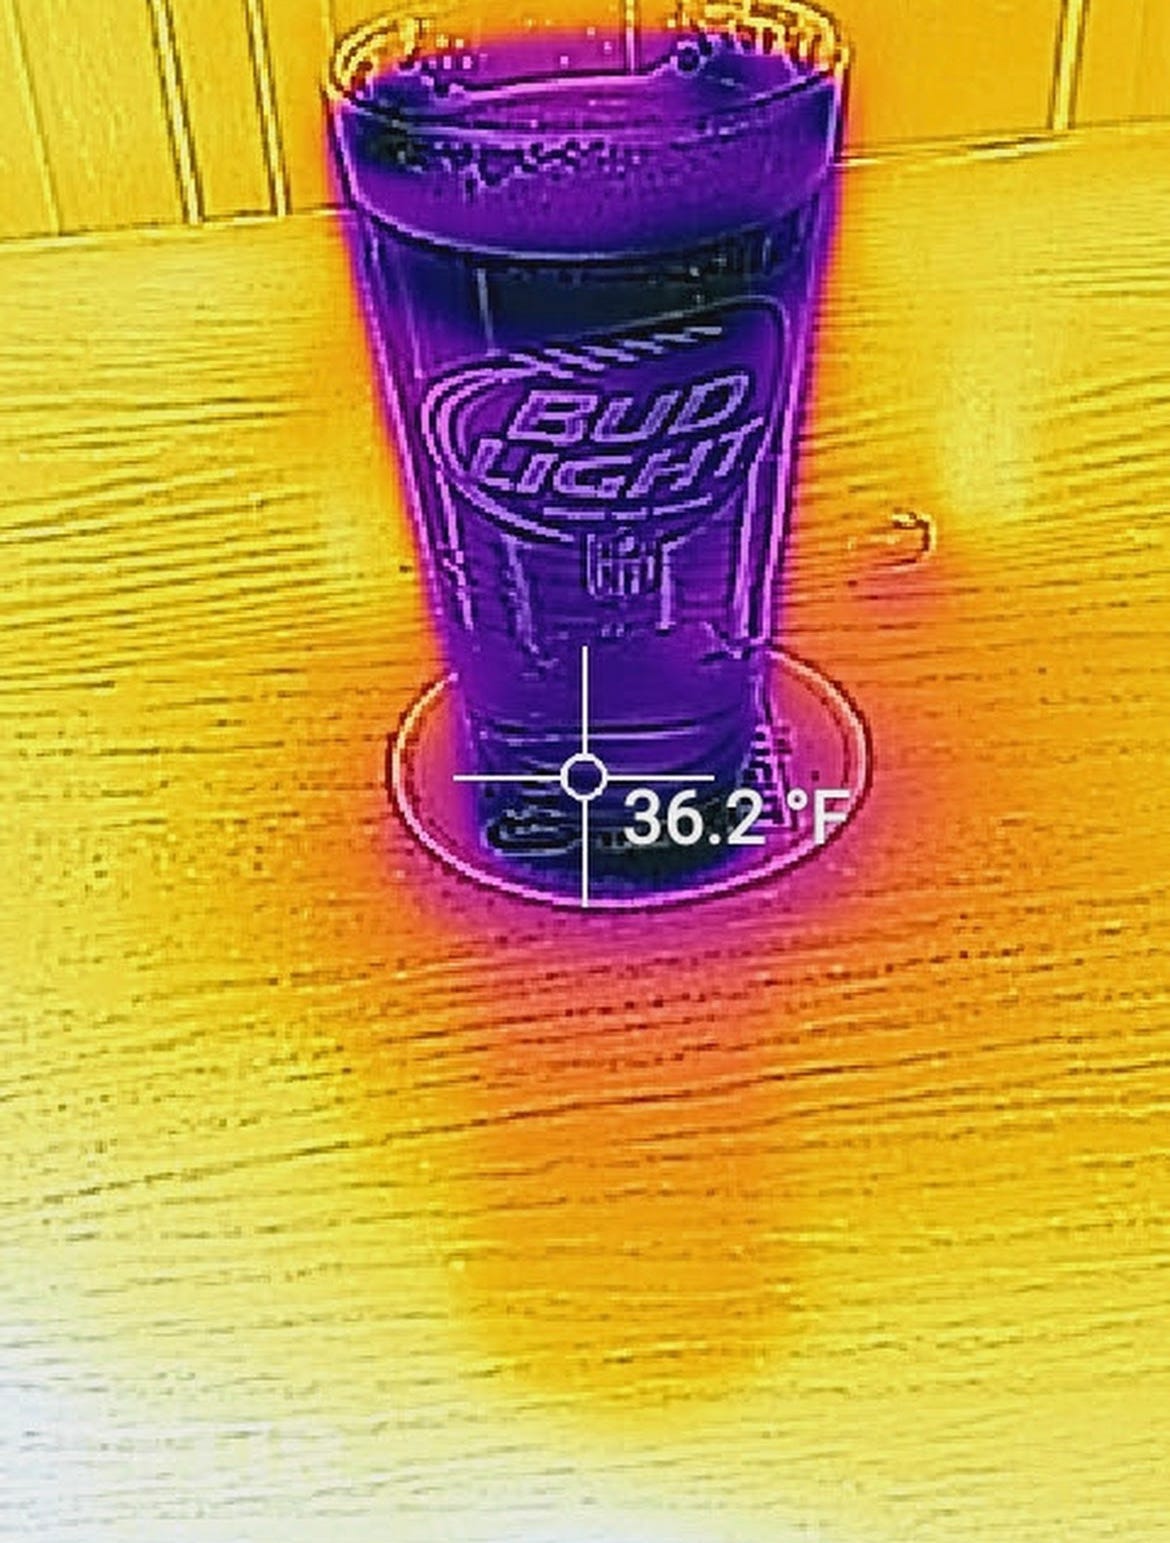 A thermal image of a beer chilled to 36.2 degrees.